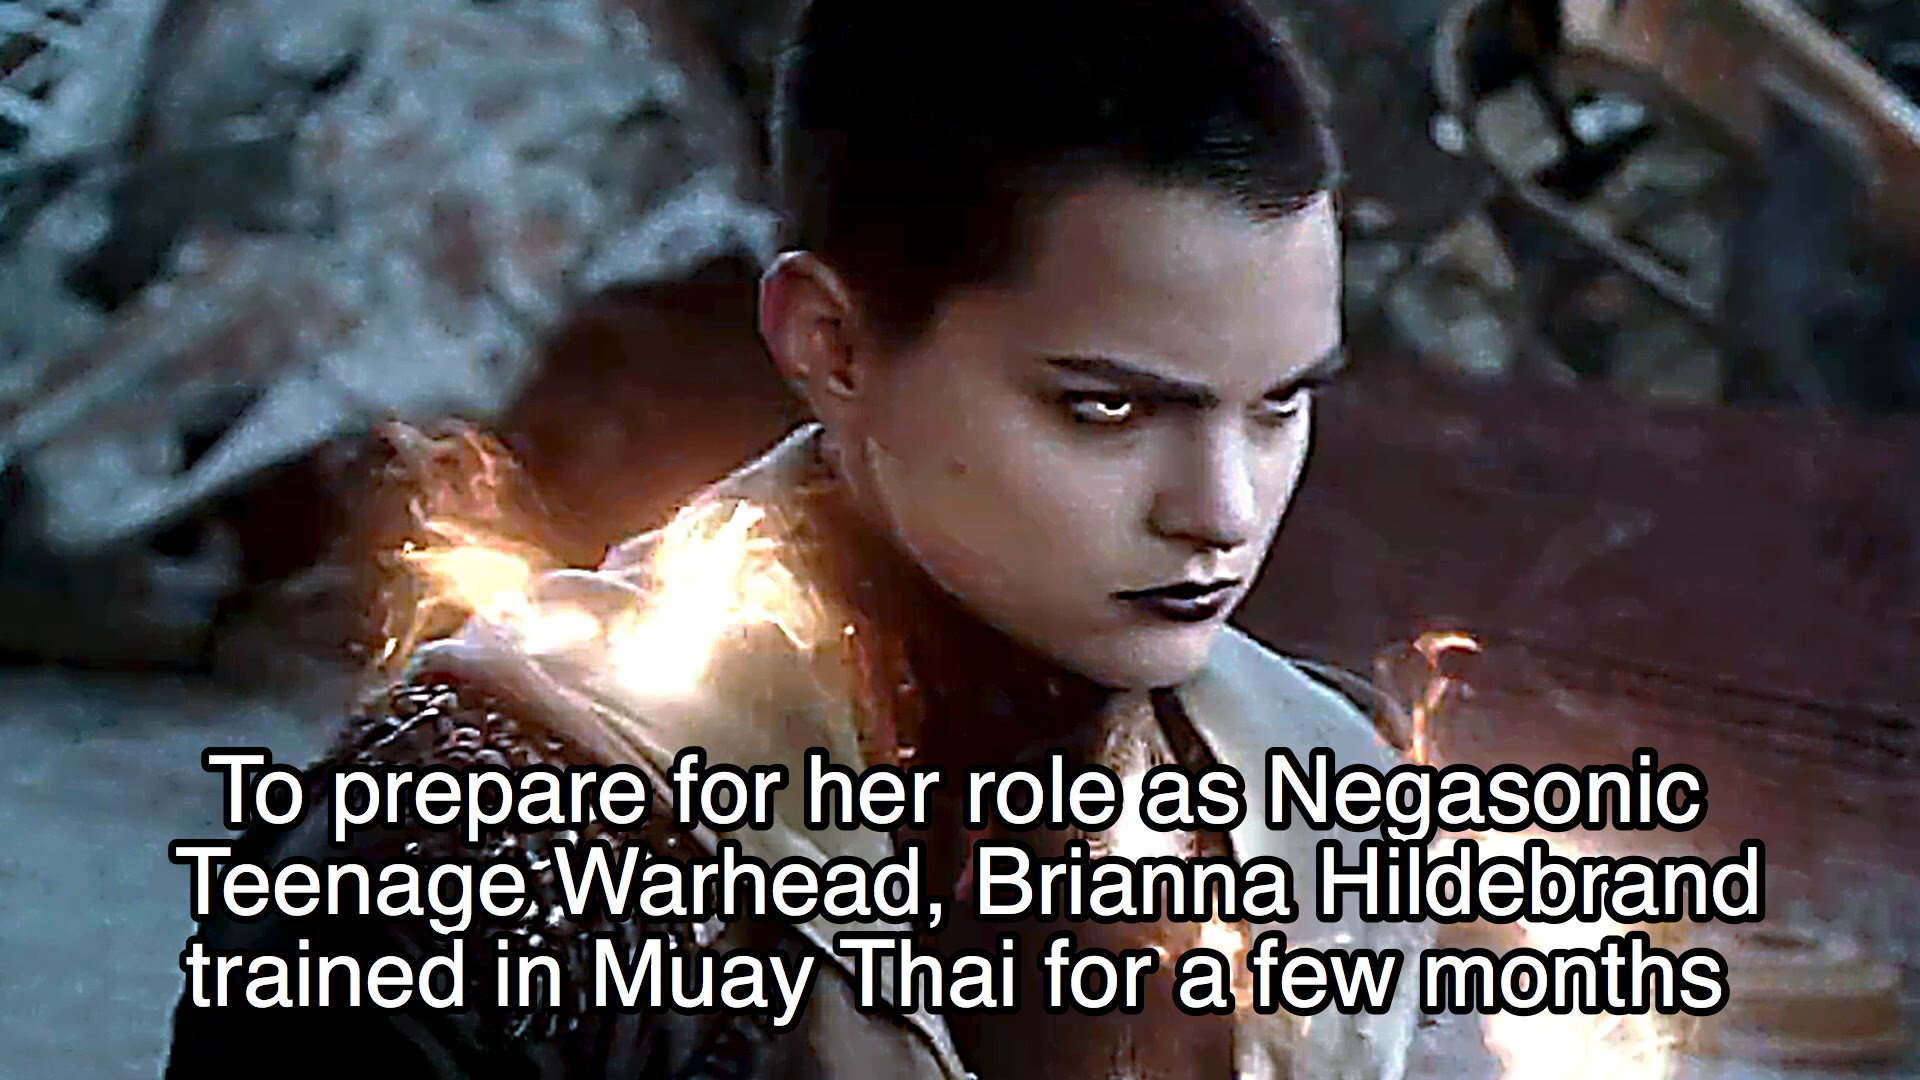 To prepare for her role as Negasonic Teenage Warhead, Brianna Hildebrand trained in Muay Thai for a few months